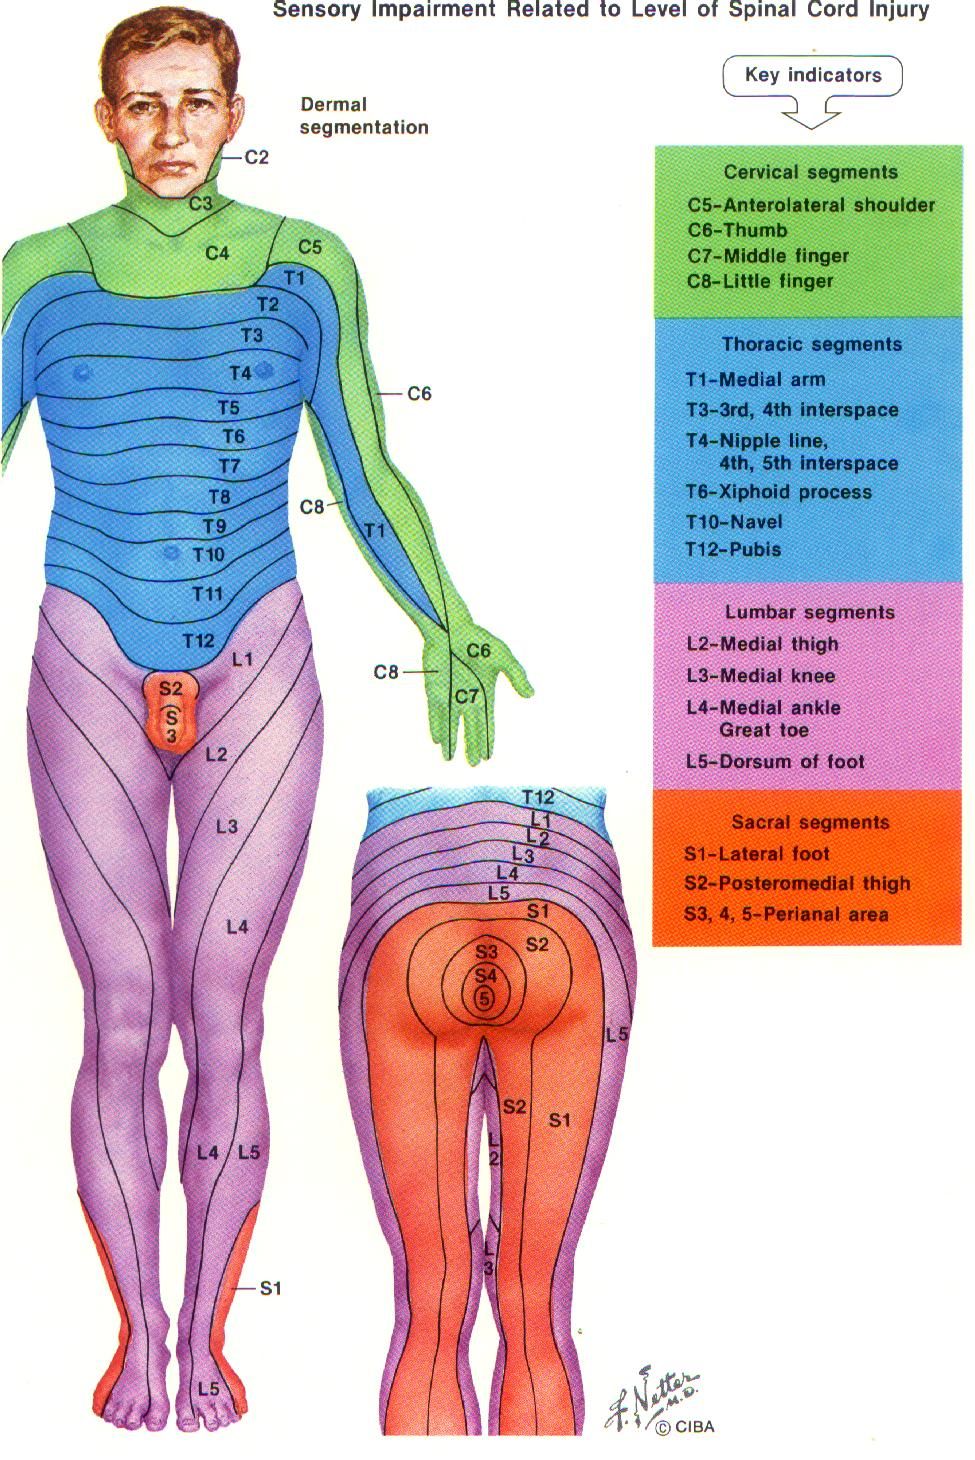 dermatome chart with symptoms | more pain first thing in the 